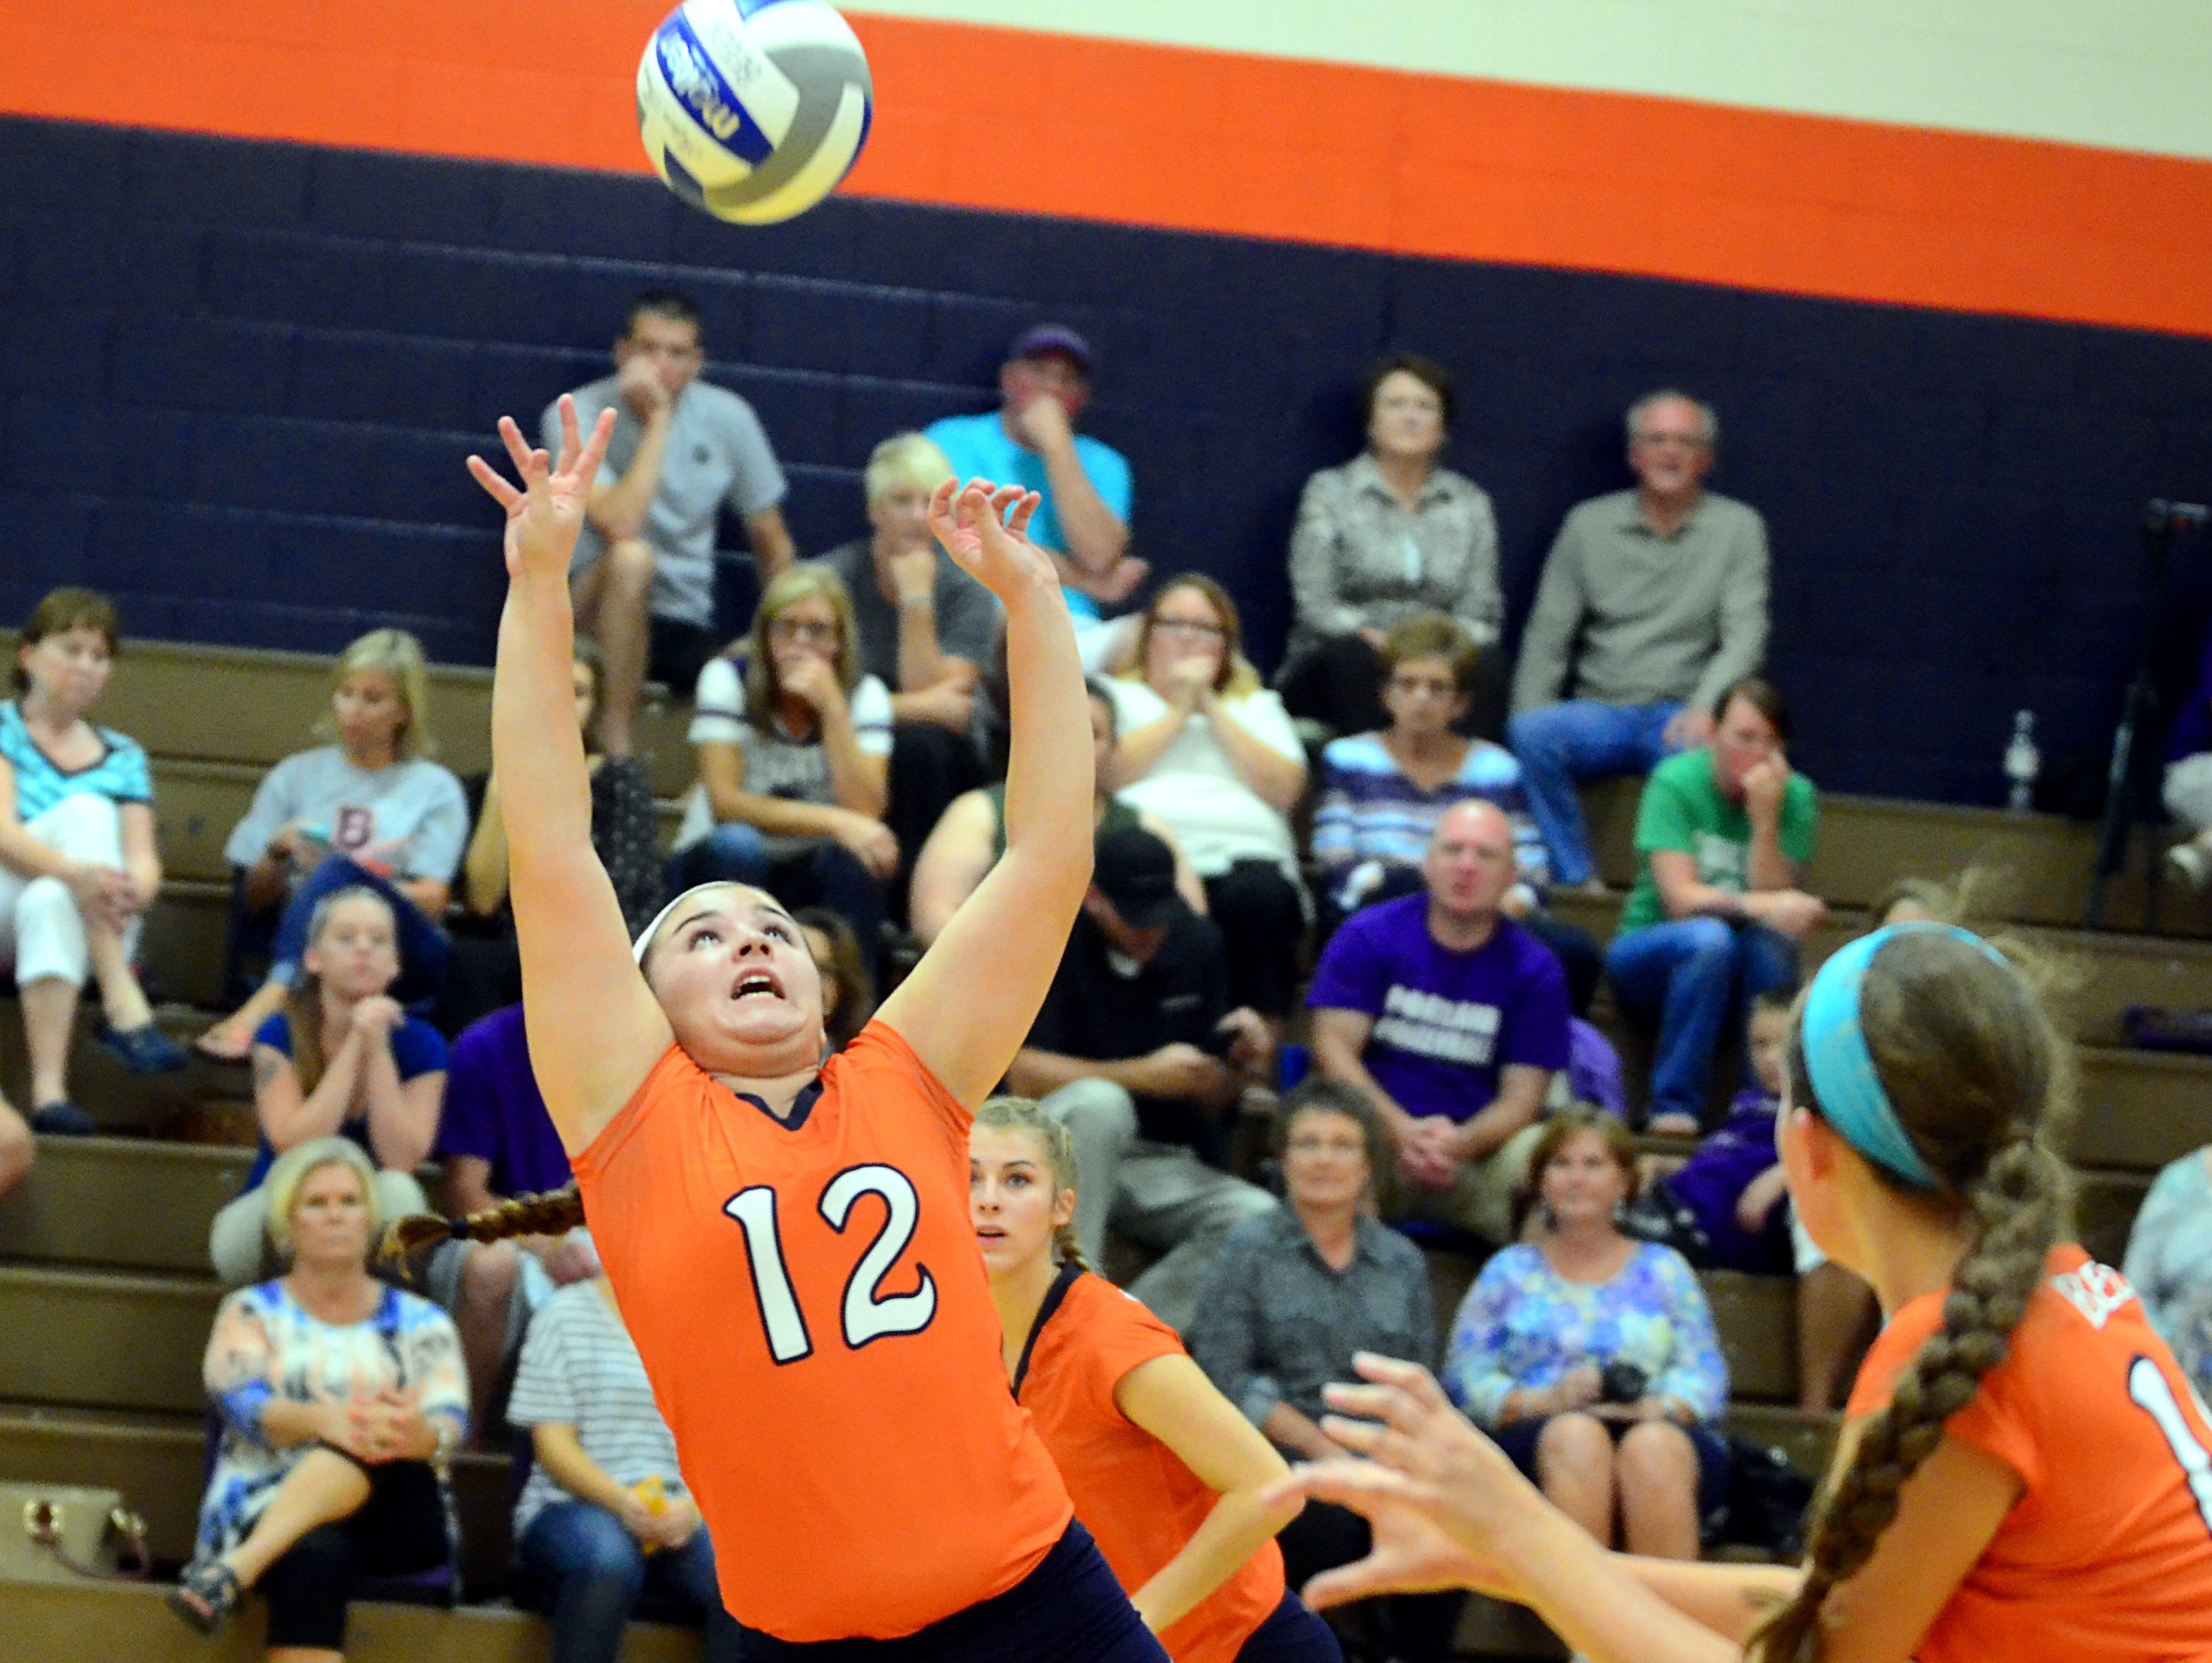 Beech senior Reeves Parrish controls a set as she falls during Tuesday’s match against Portland. The Lady Buccaneers won in five sets.